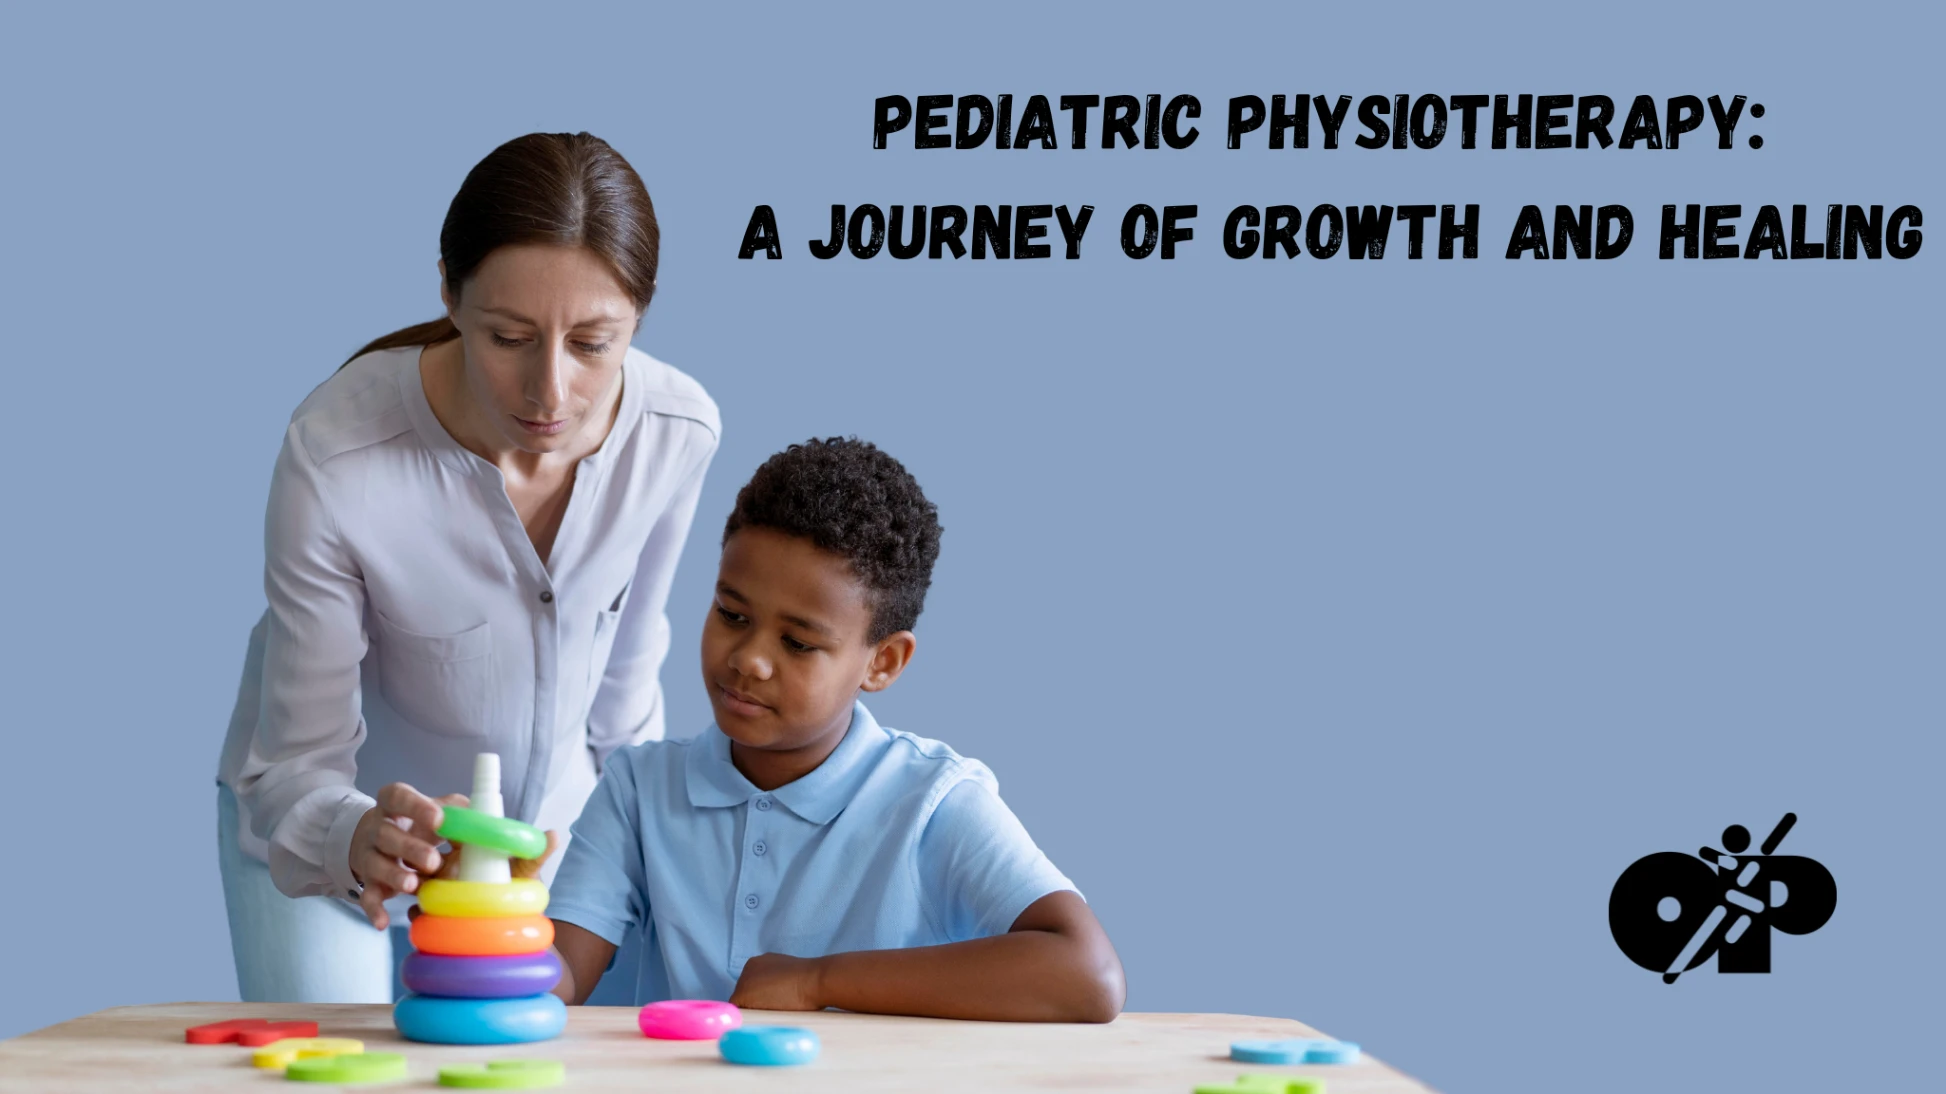 12. Pediatric Physiotherapy – A Journey of Growth and Healing